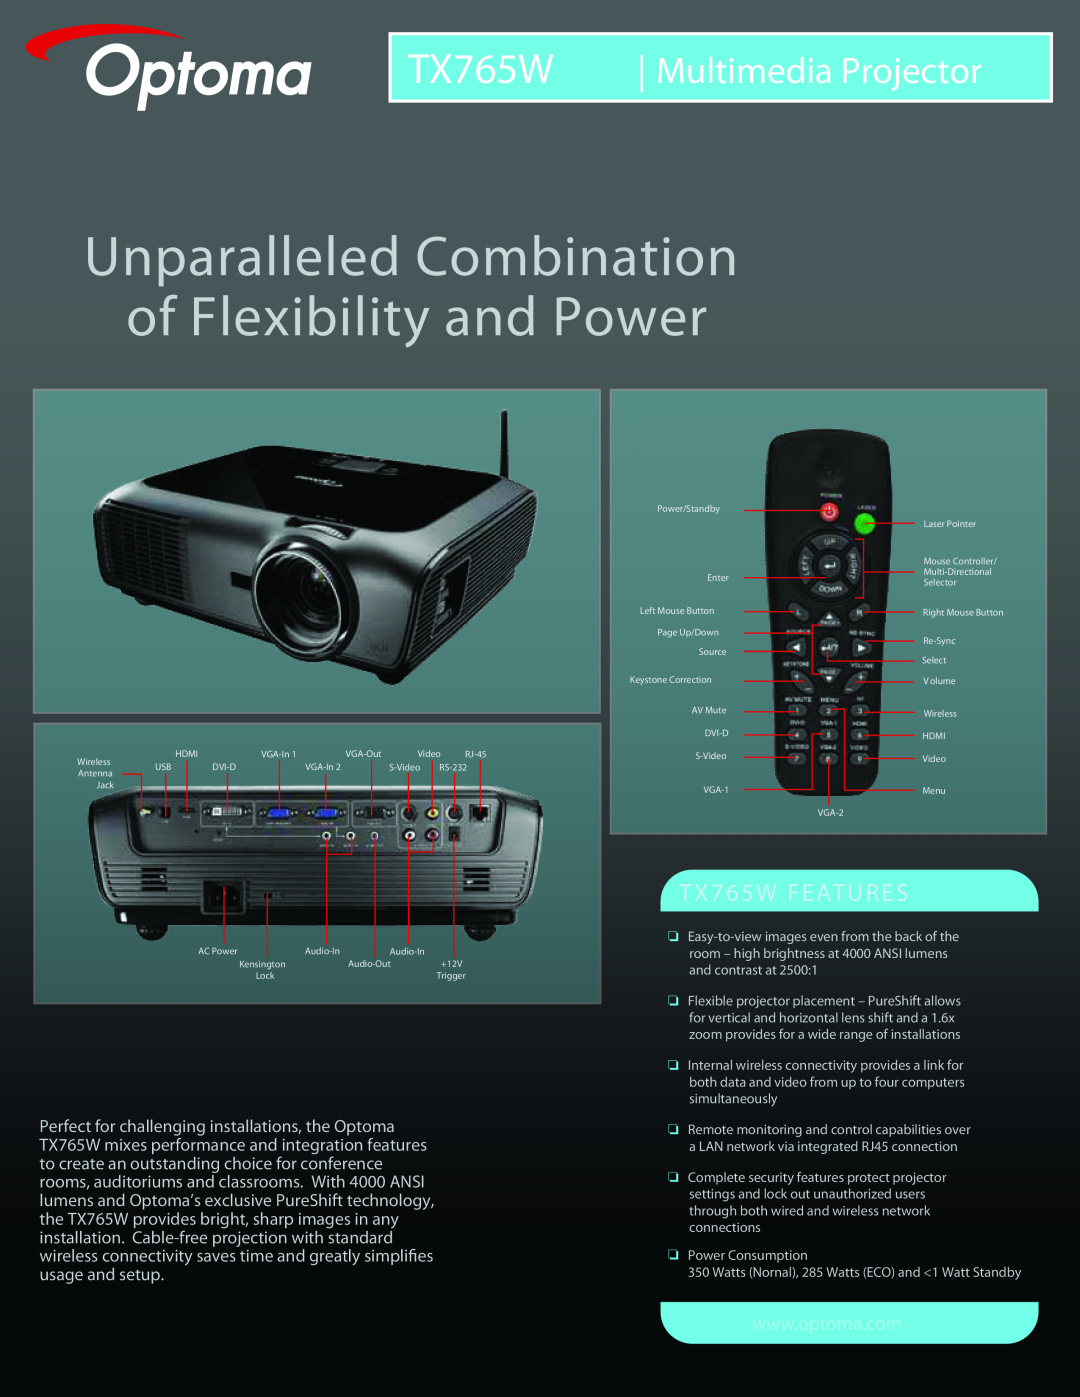 Optoma Technology manual TX765W Multimedia Projector, Unparalleled Combination of Flexibility and Power 